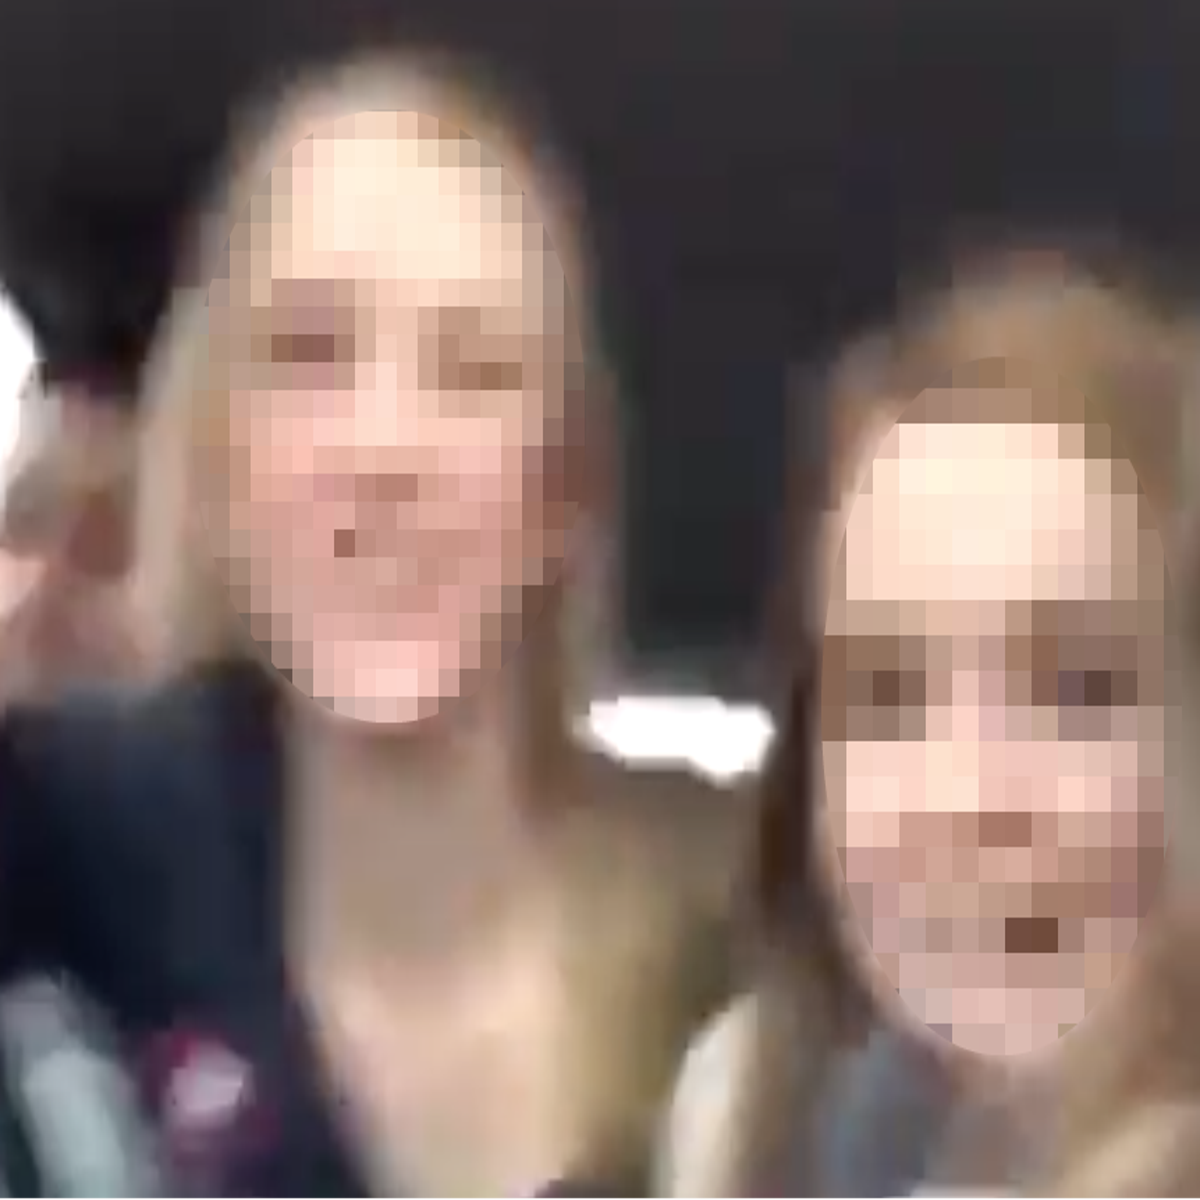 Amateur Teen Girl On Webcam - Teenage girls in Utah 'scream f*** n*****s' in video uploaded to Instagram  | The Independent | The Independent